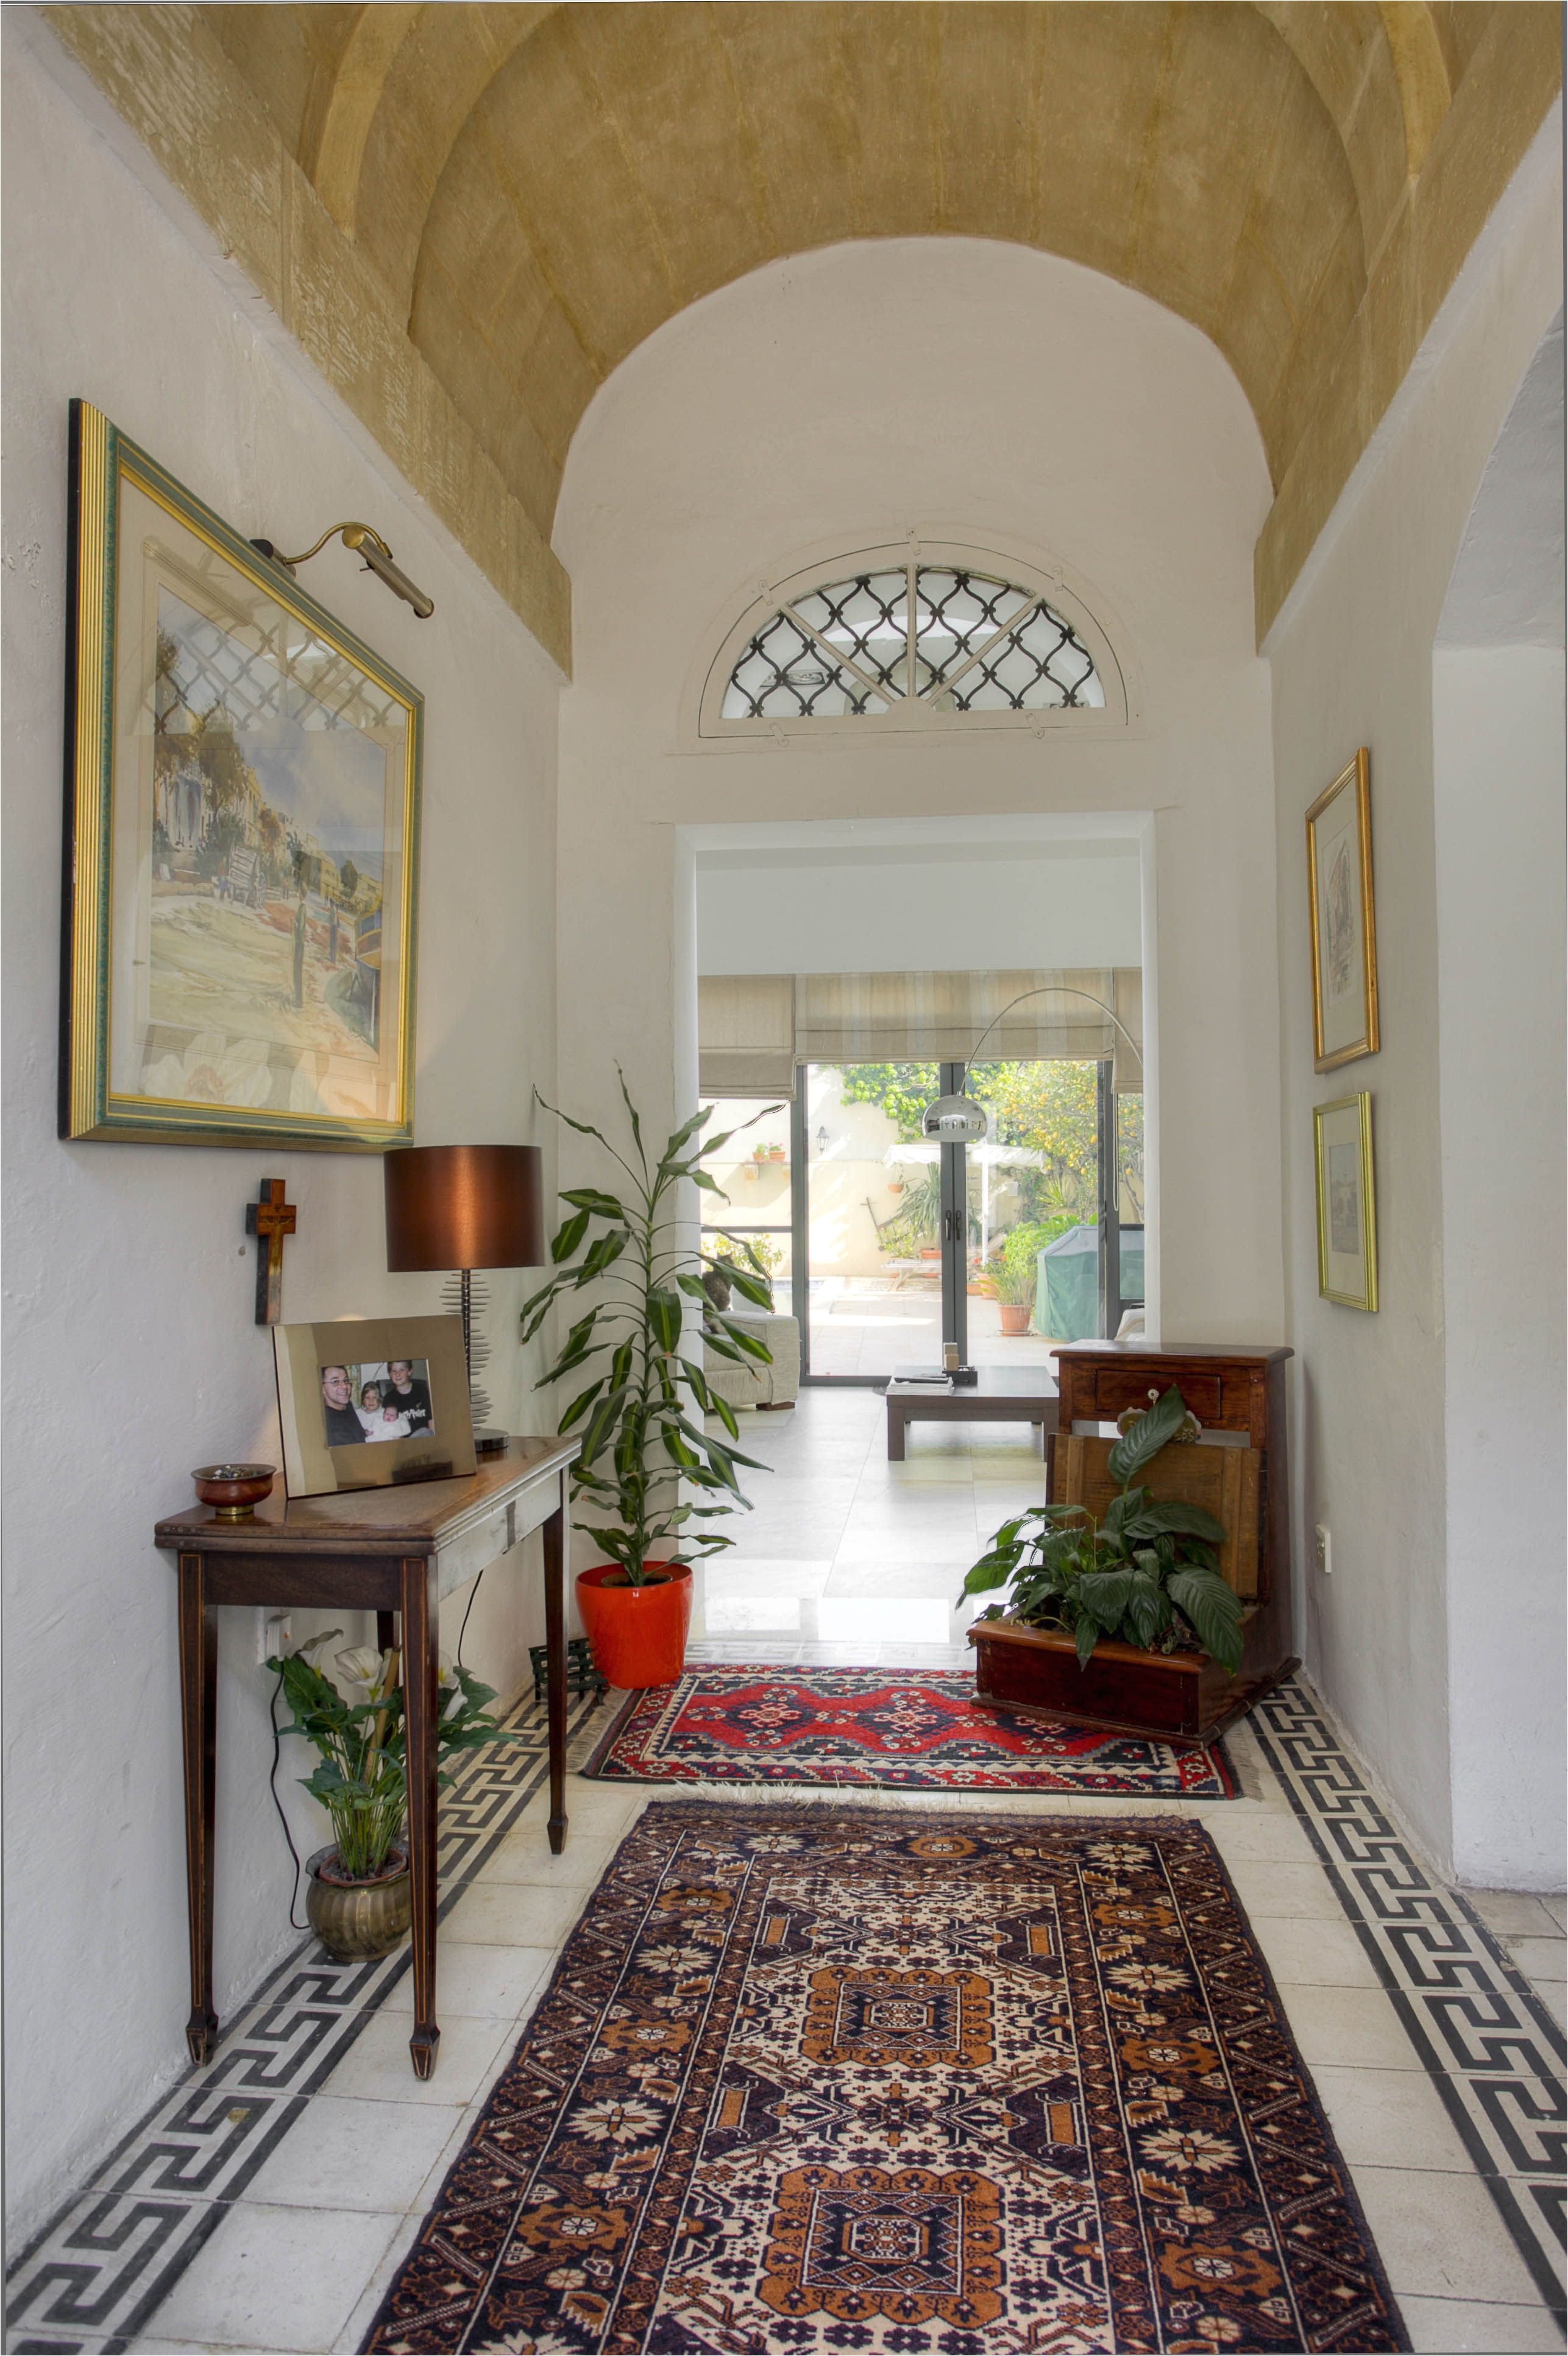 typical traditional maltese house interior